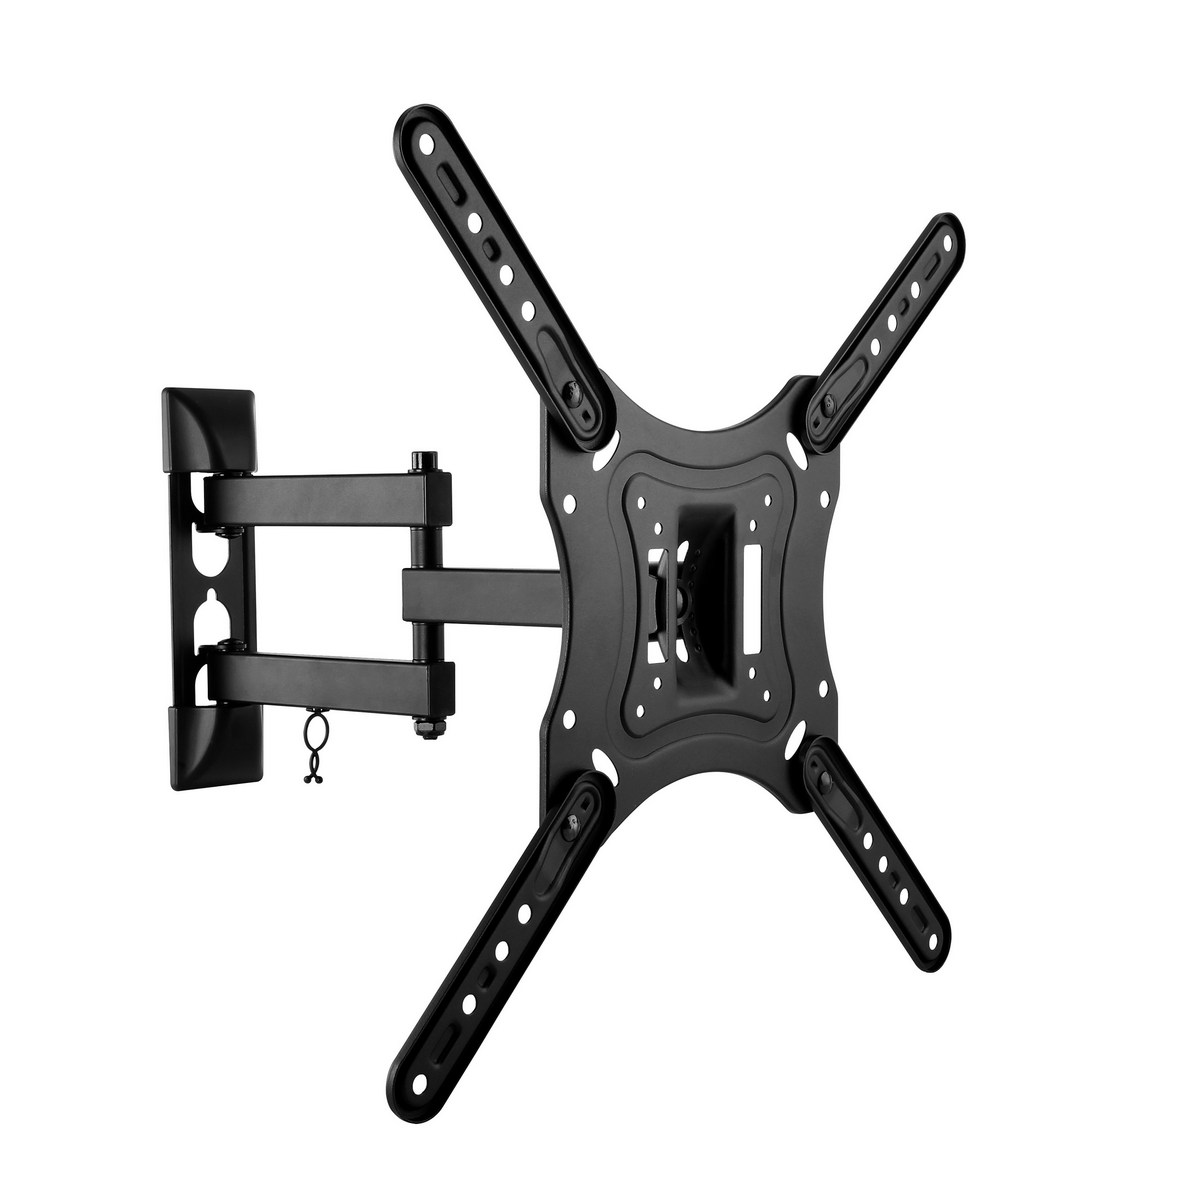 Corliving Mpm-805-a Full Motion Flat Panel Wall Mount For Tvs Up To 55"